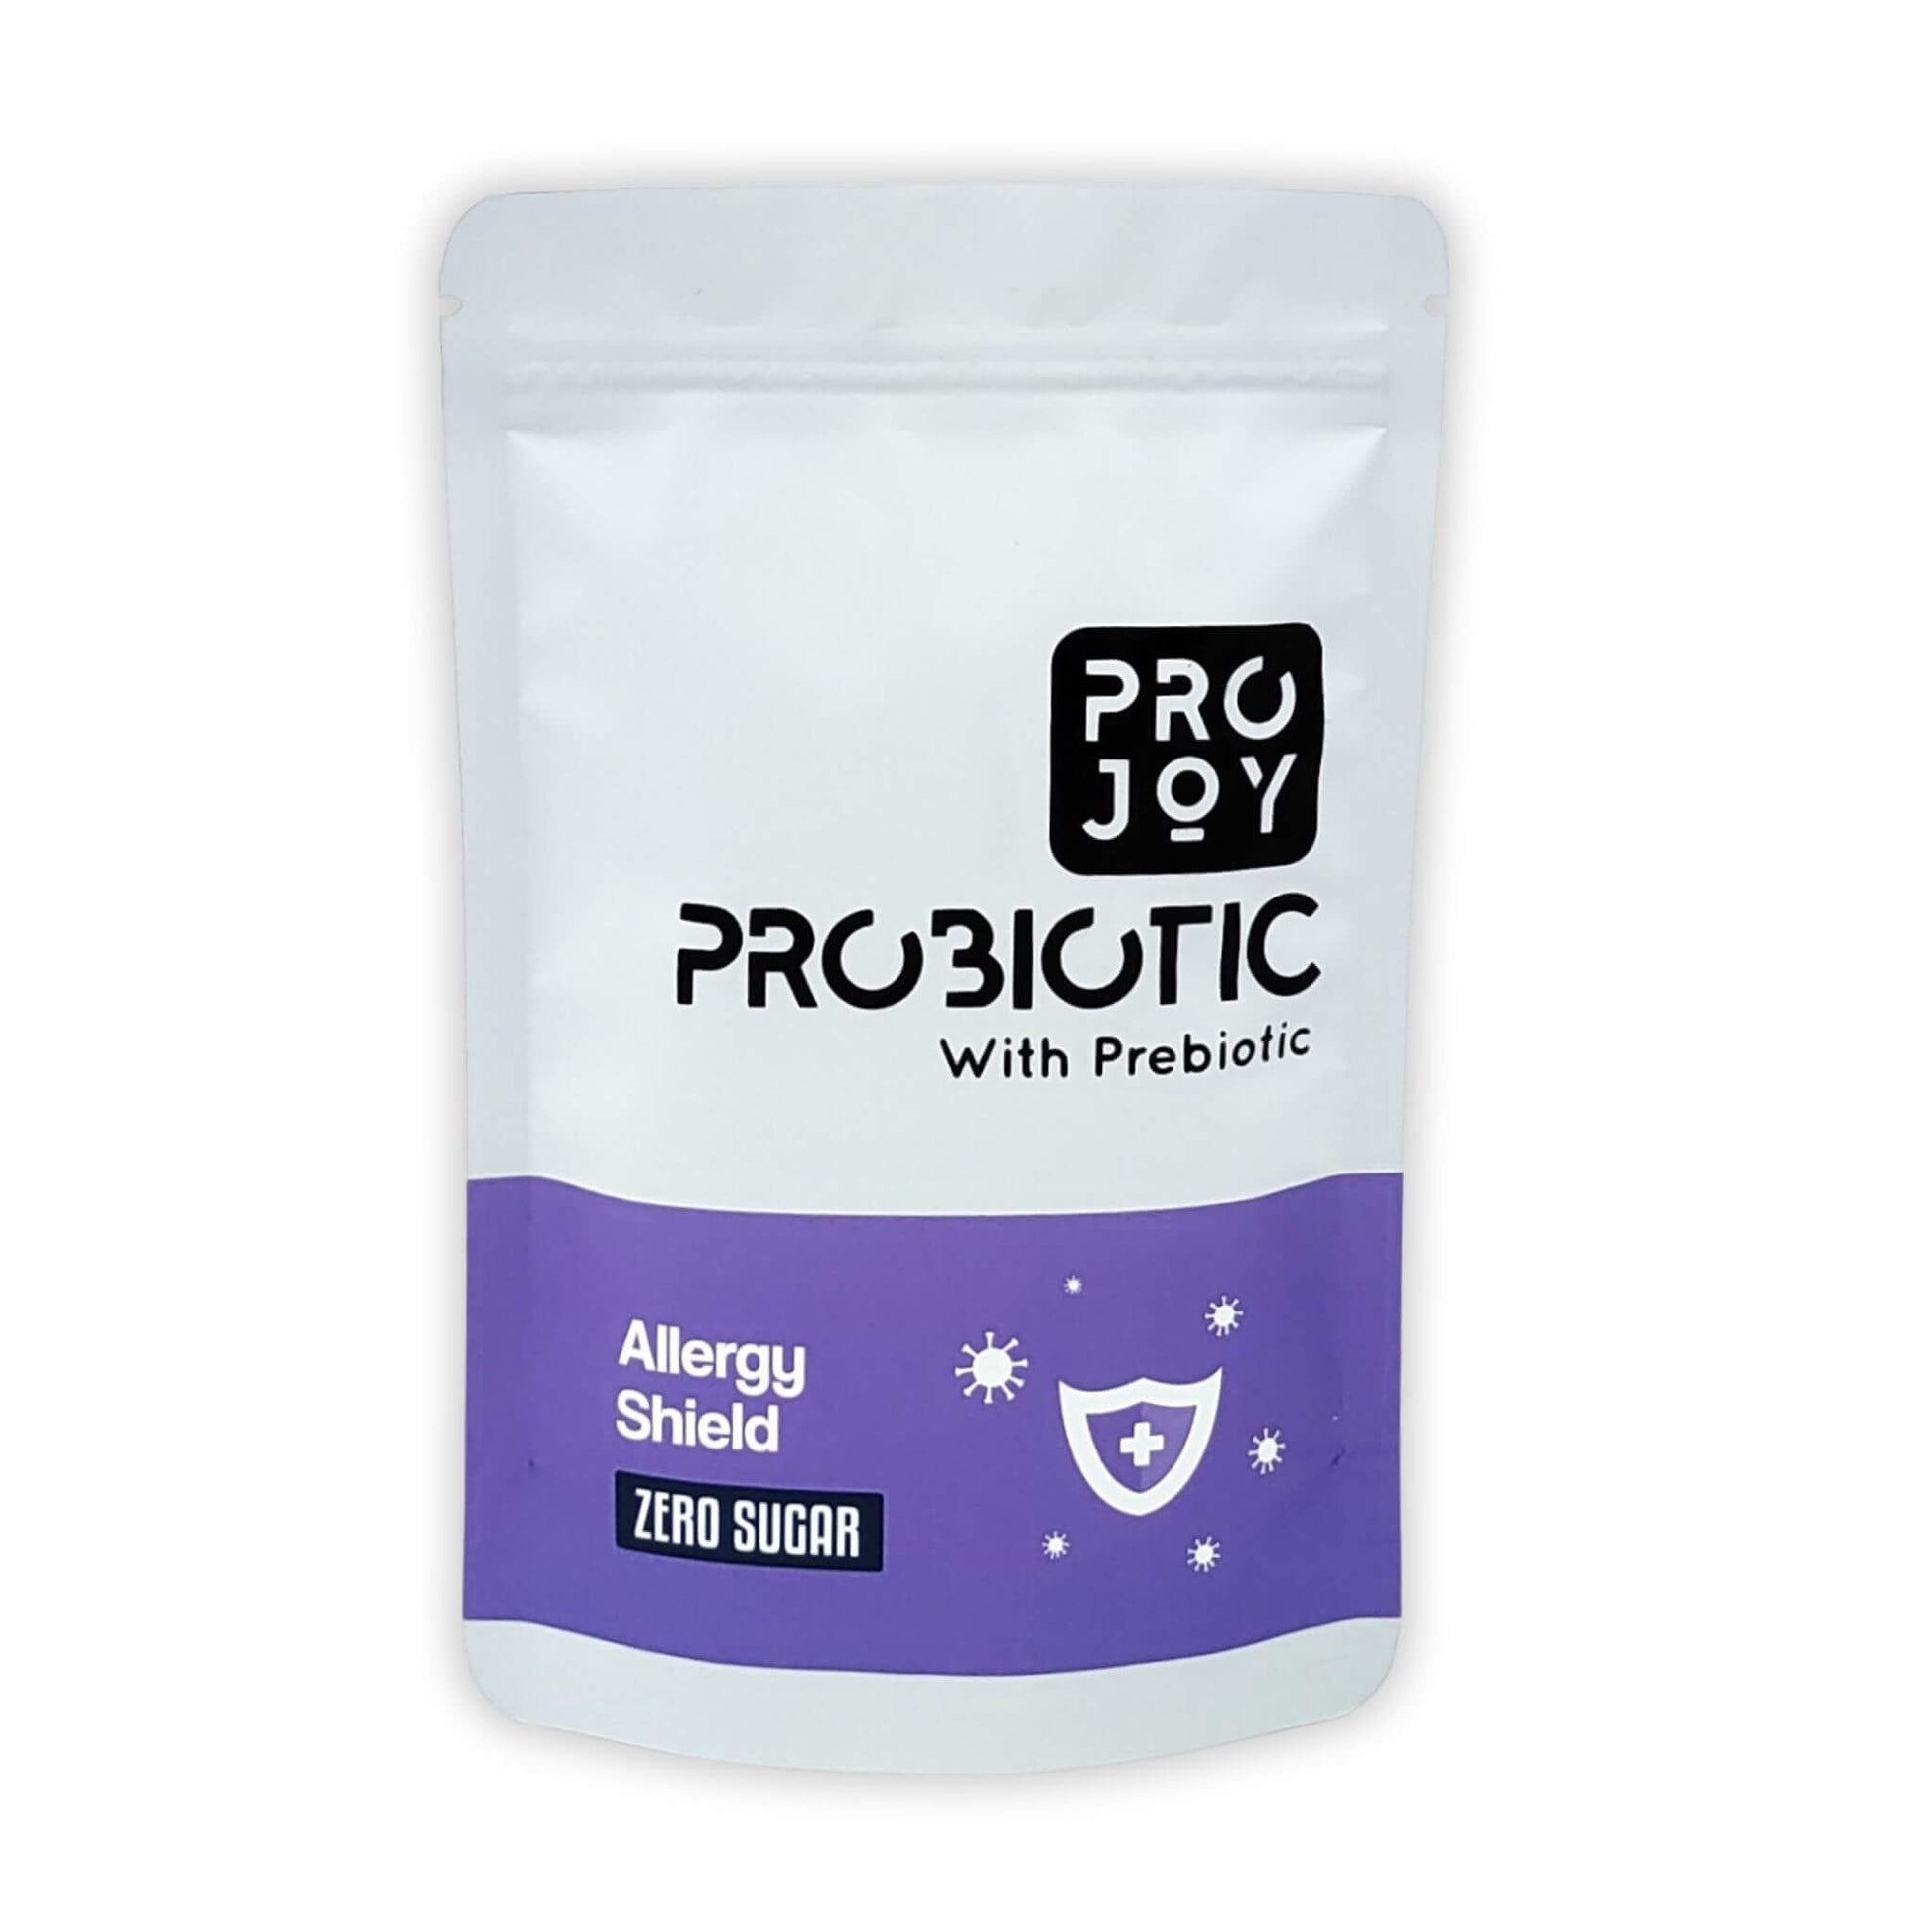 "Projoy Probiotic Food Supplement Powder in a Standup Pouch for Allergy Relief and Prevention" - The image may show a standup pouch package of Projoy probiotic food supplement powder, featuring the product name and a tagline promoting its benefits for allergy relief and prevention.